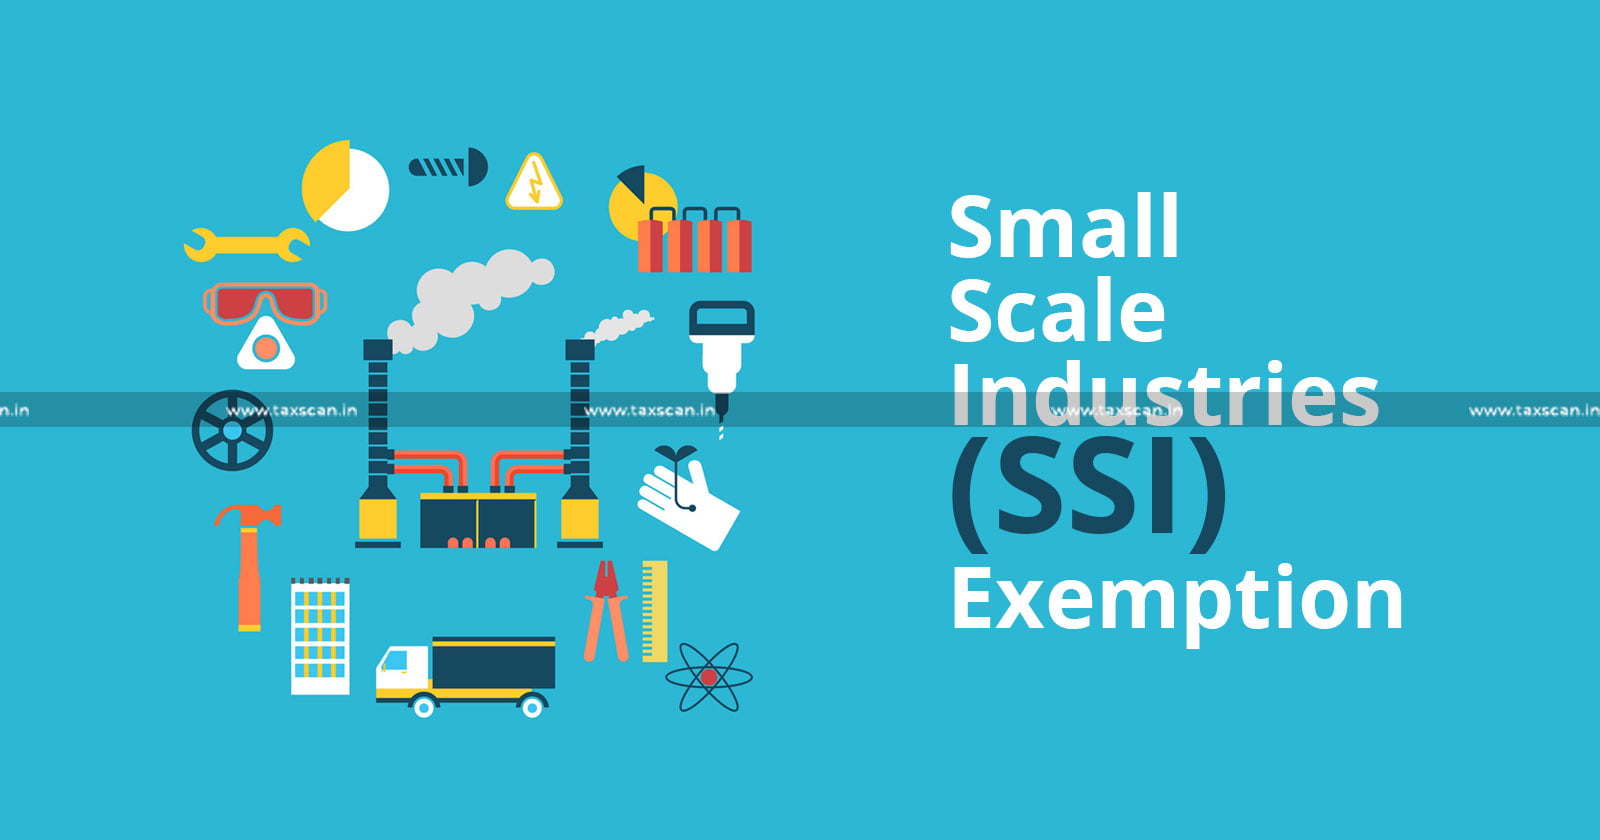 Small Scame industry - exemption - eligibility - assessee - use - surname - family - separate - entity - CESTAT - SSI - taxscan